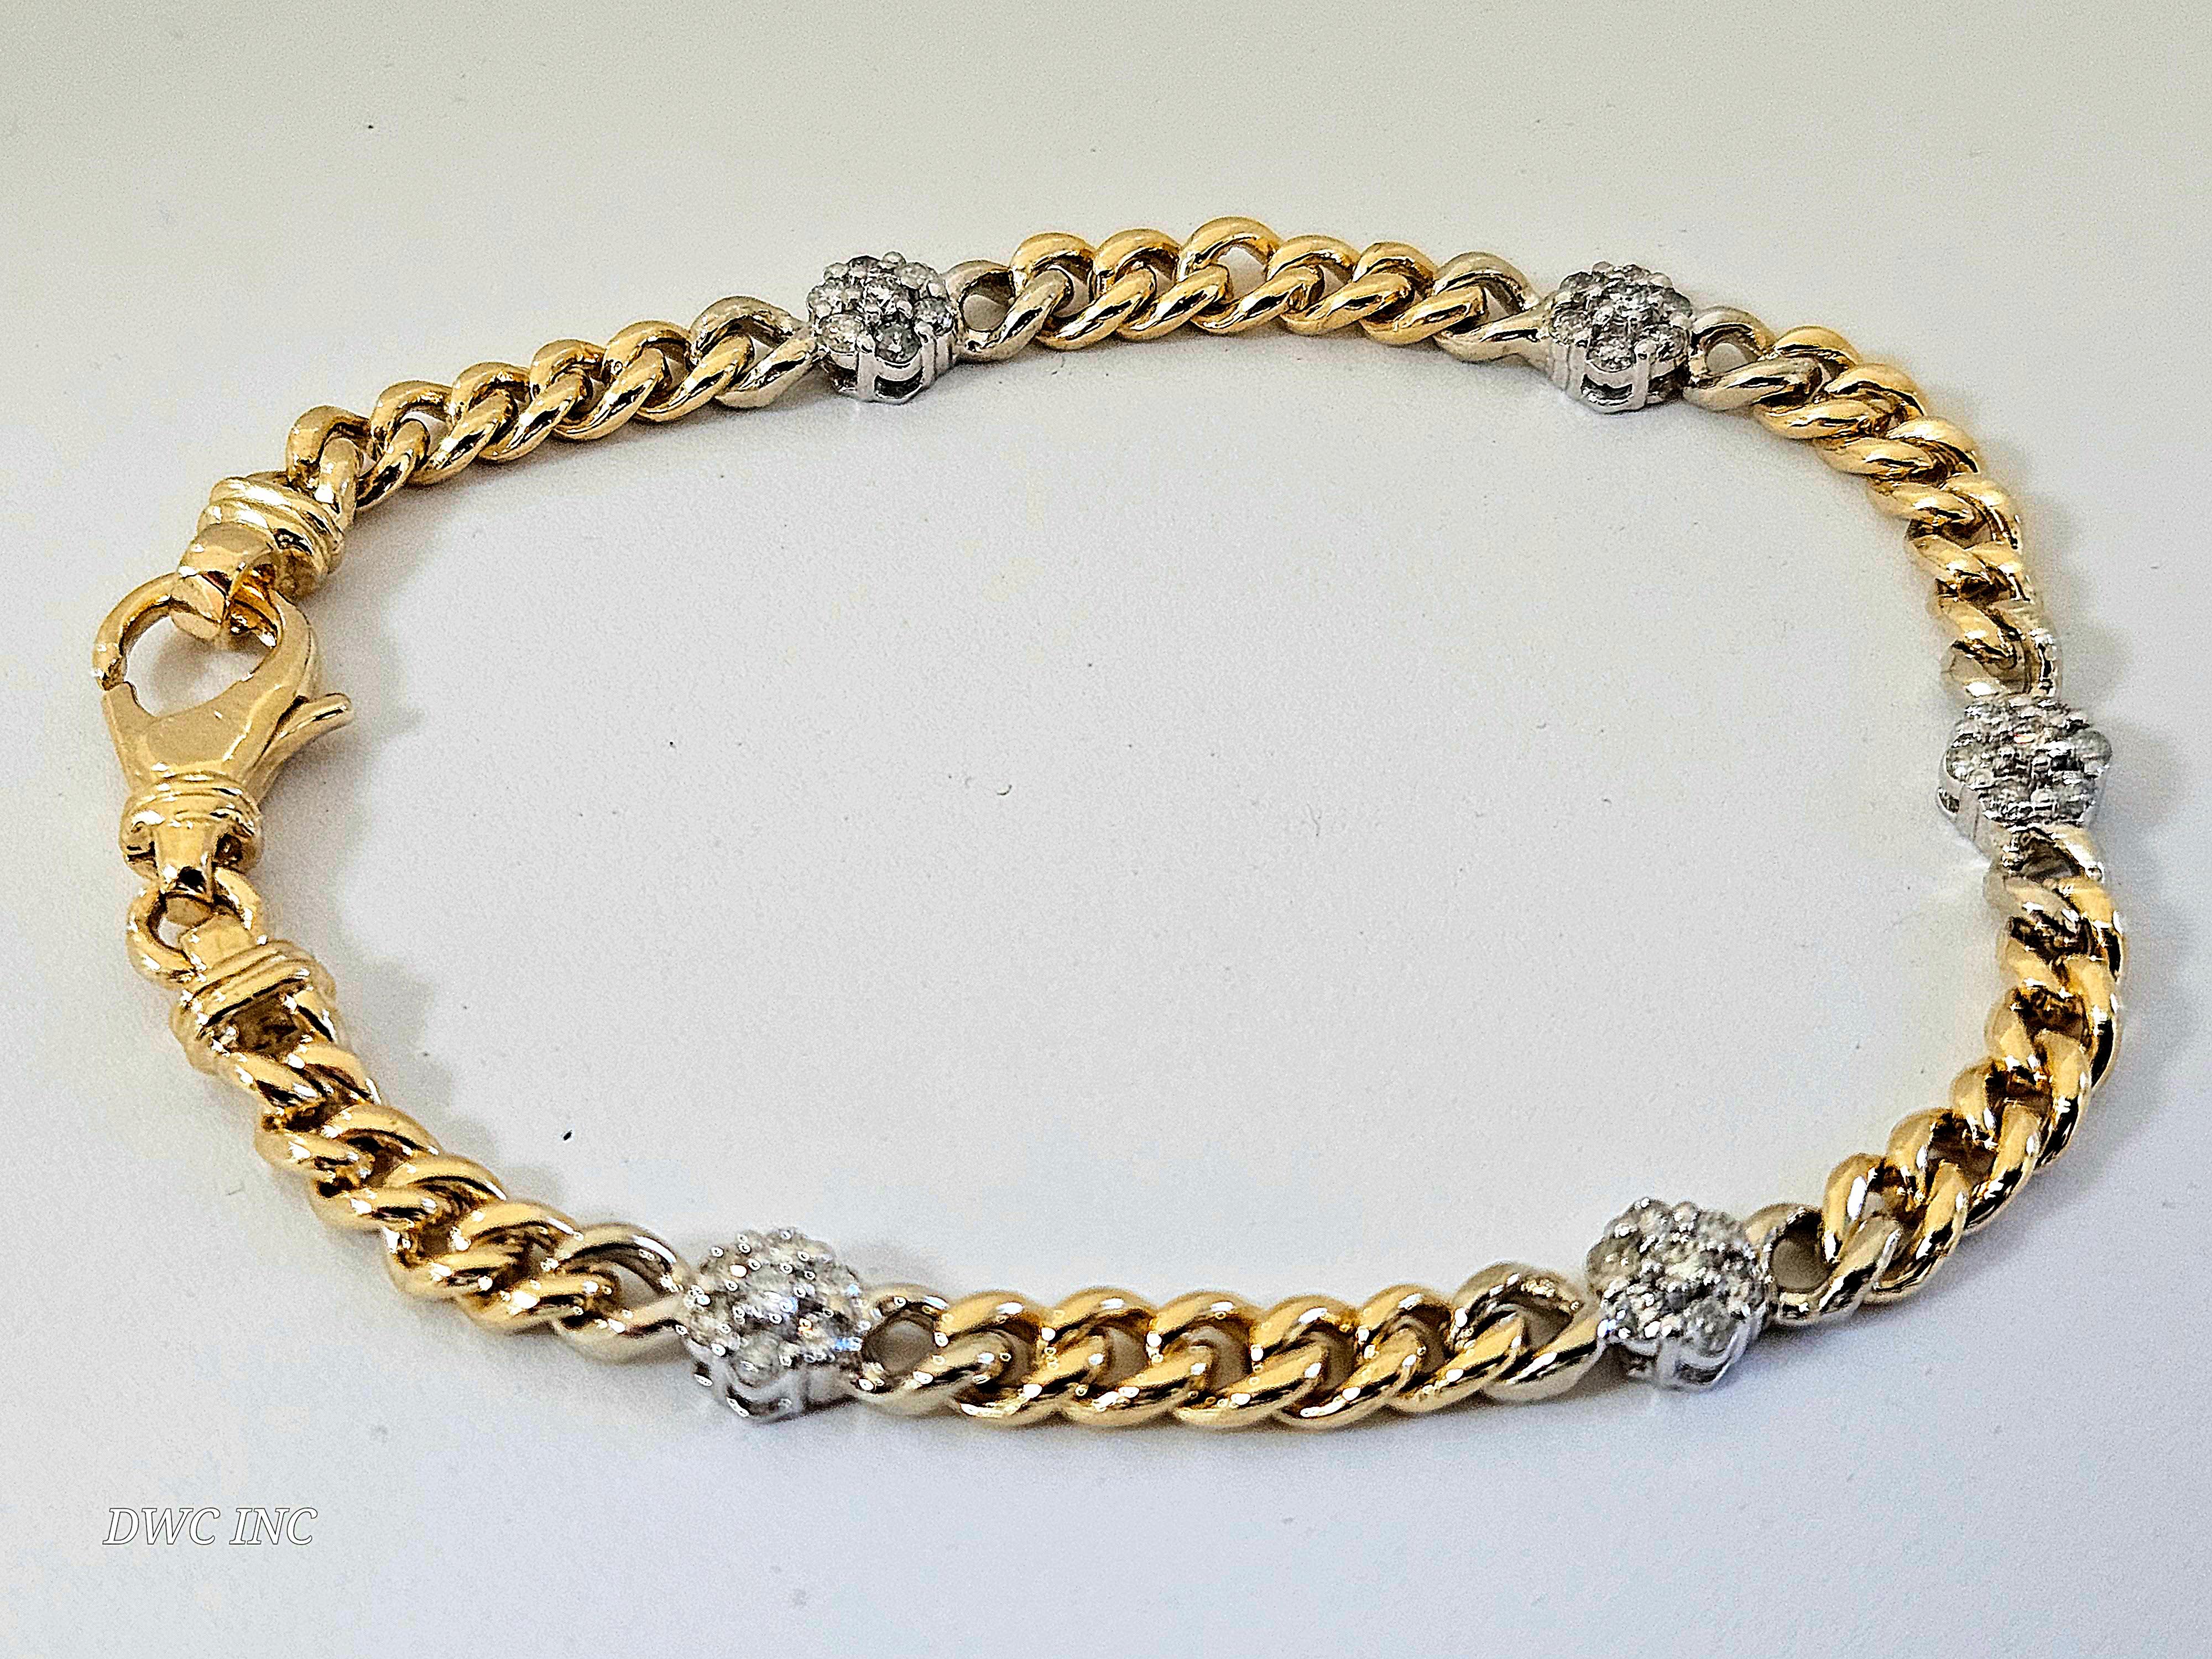 0.75 ctw Natural Diamond Cuban Bracelet Yellow and White Gold 14K 7 inch
Natural Round Diamonds, Very shiny, secure box togue clasp.
Average color H-I, 35pcs  5.7 mm width. 12.28 grams.

*Free shipping within the U.S.*